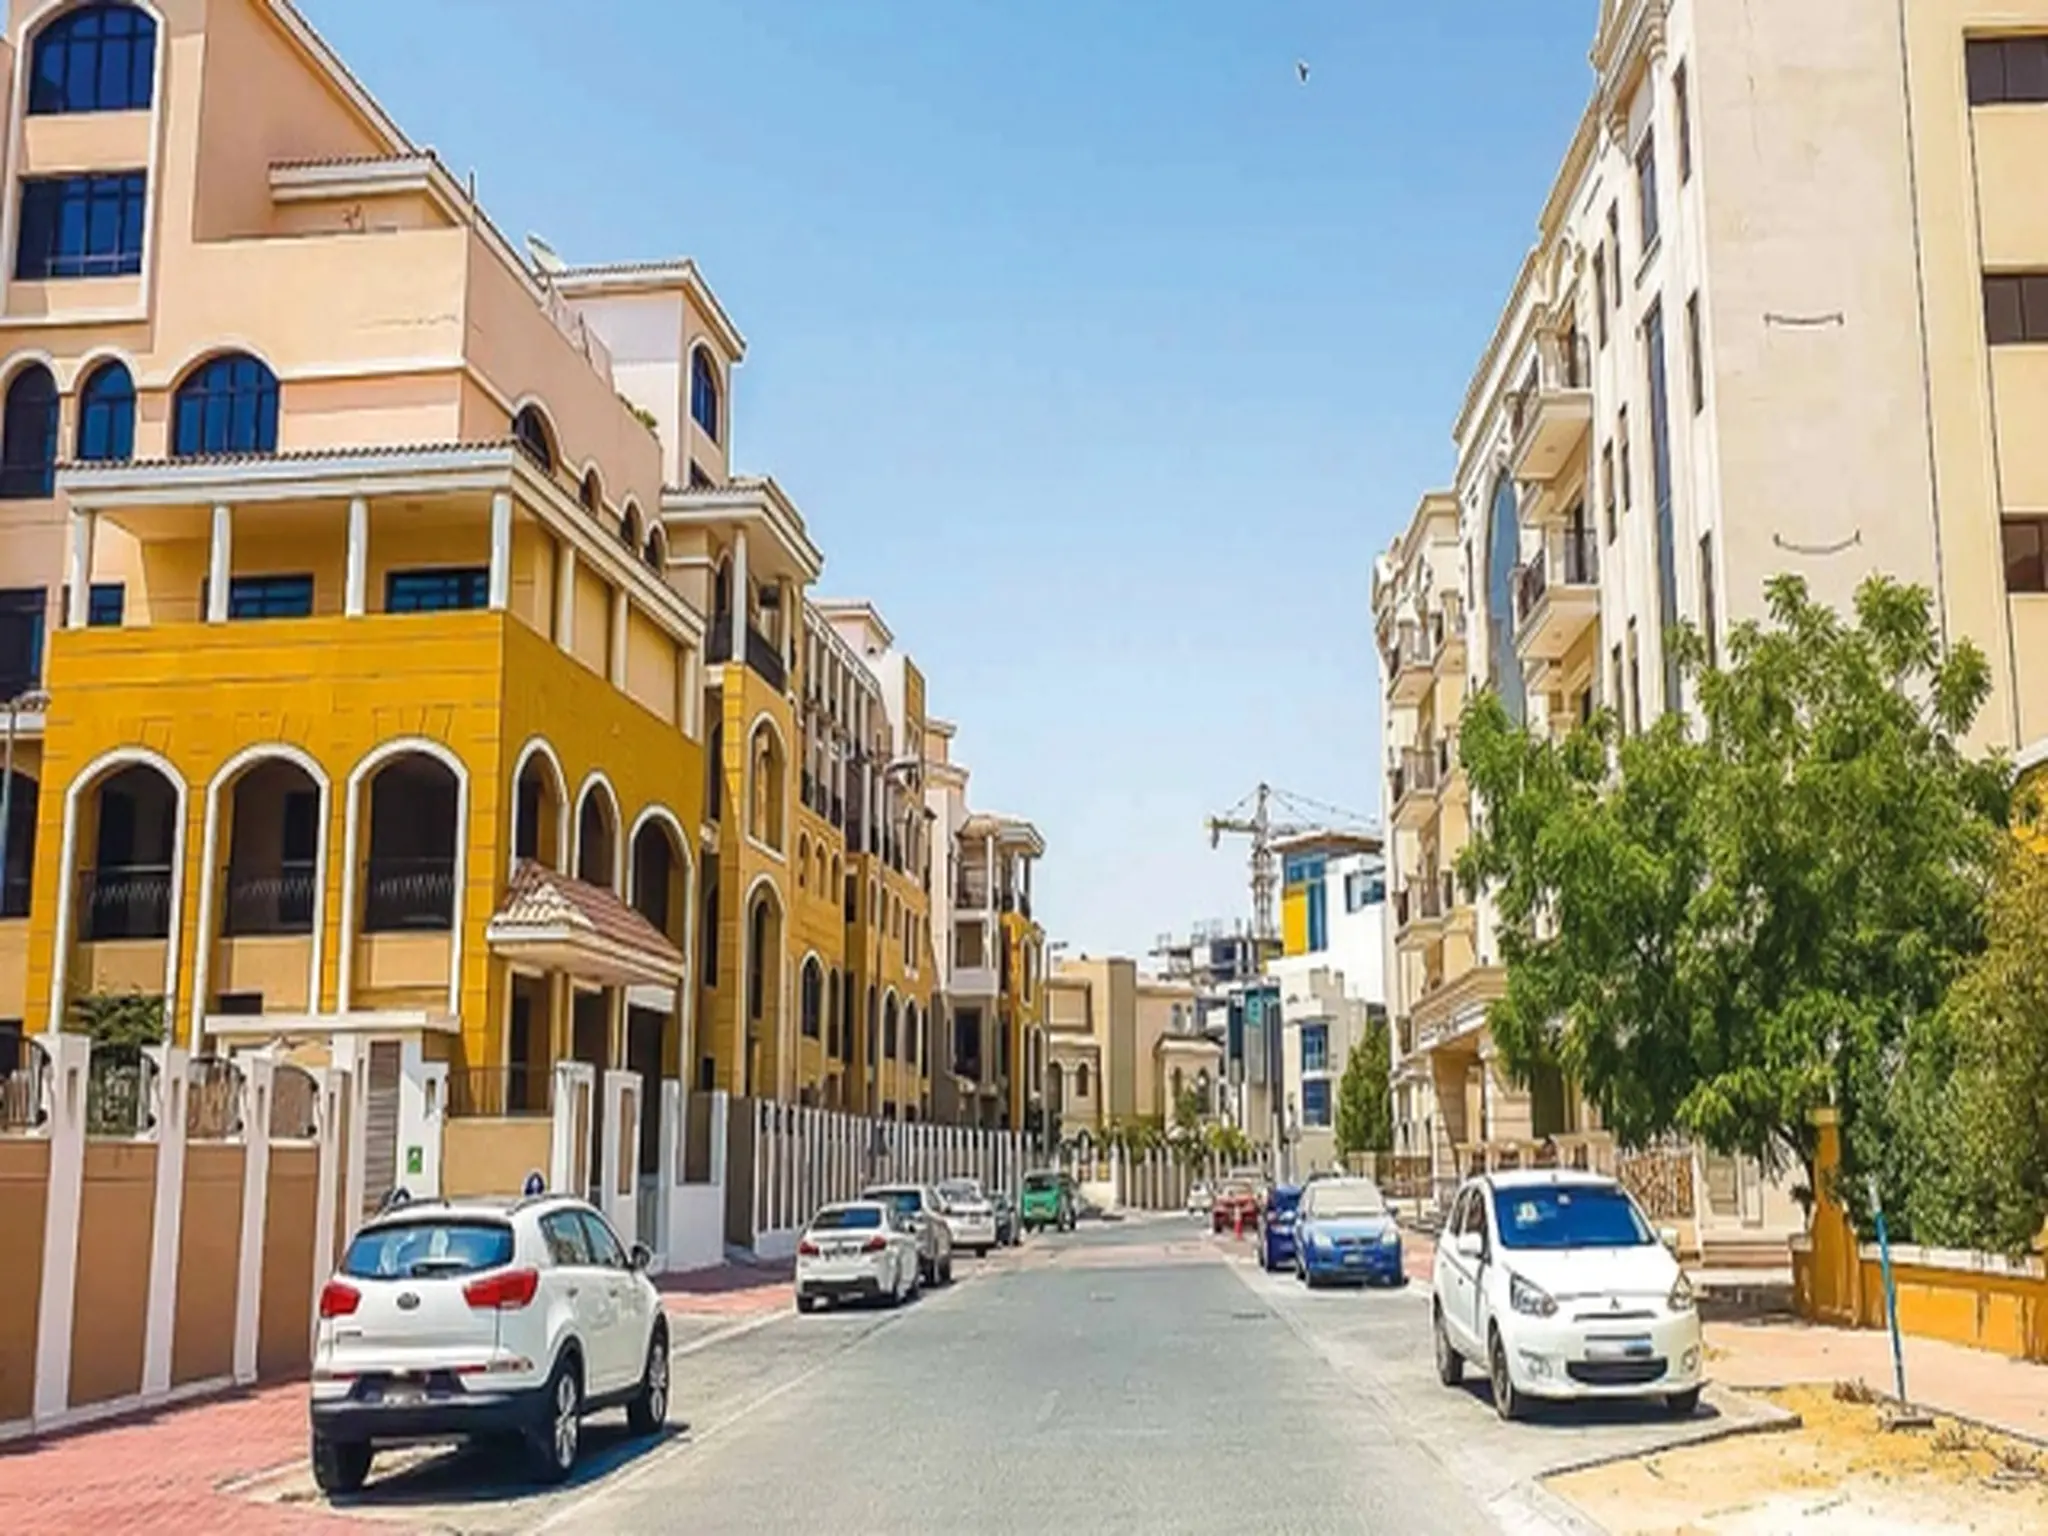 The 5 best areas to rent a house in Dubai for less than 4,000 dirhams per month